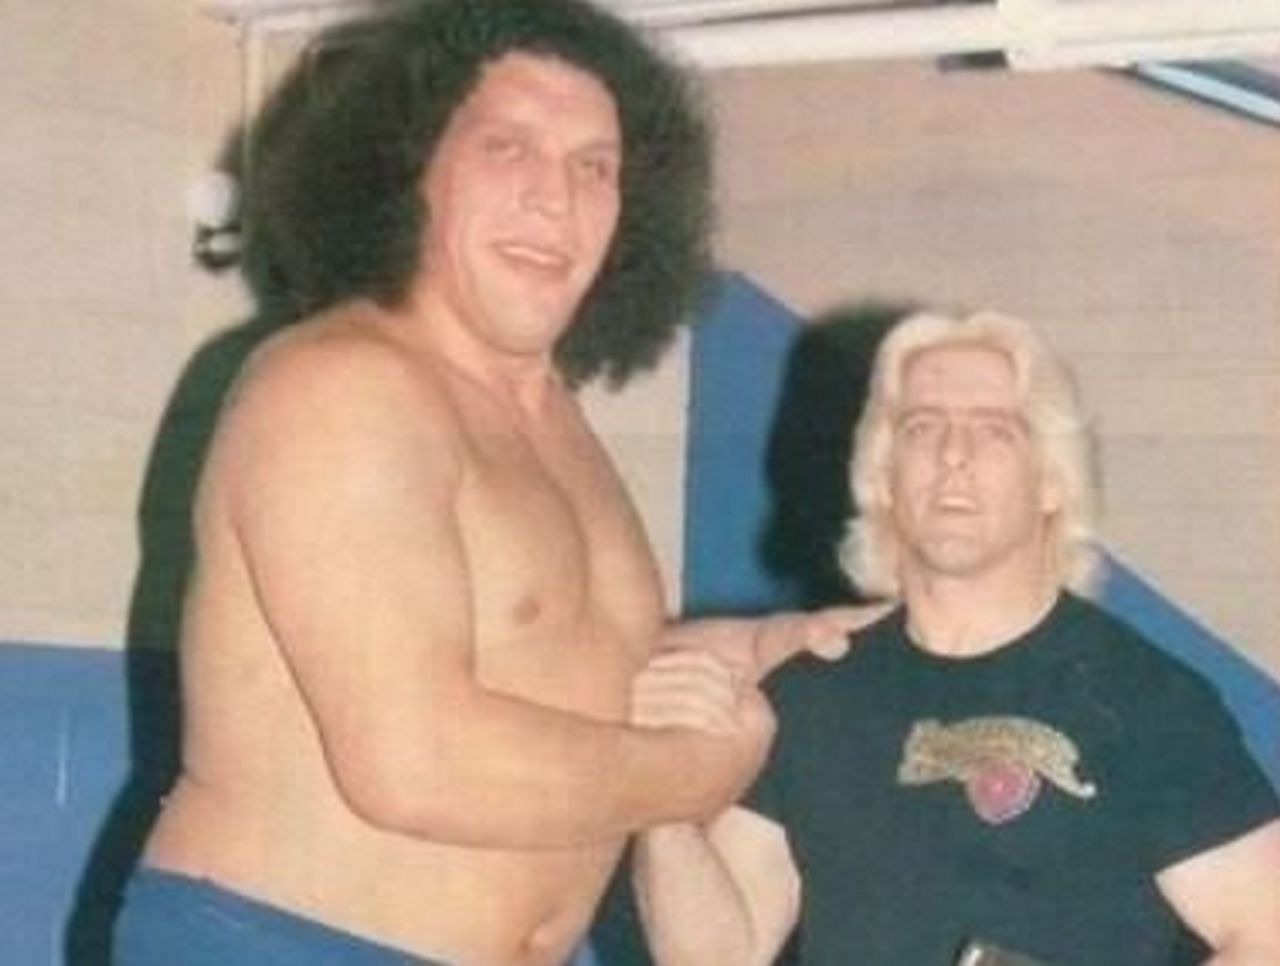 Ric Flair and Andre the Giant were good friends